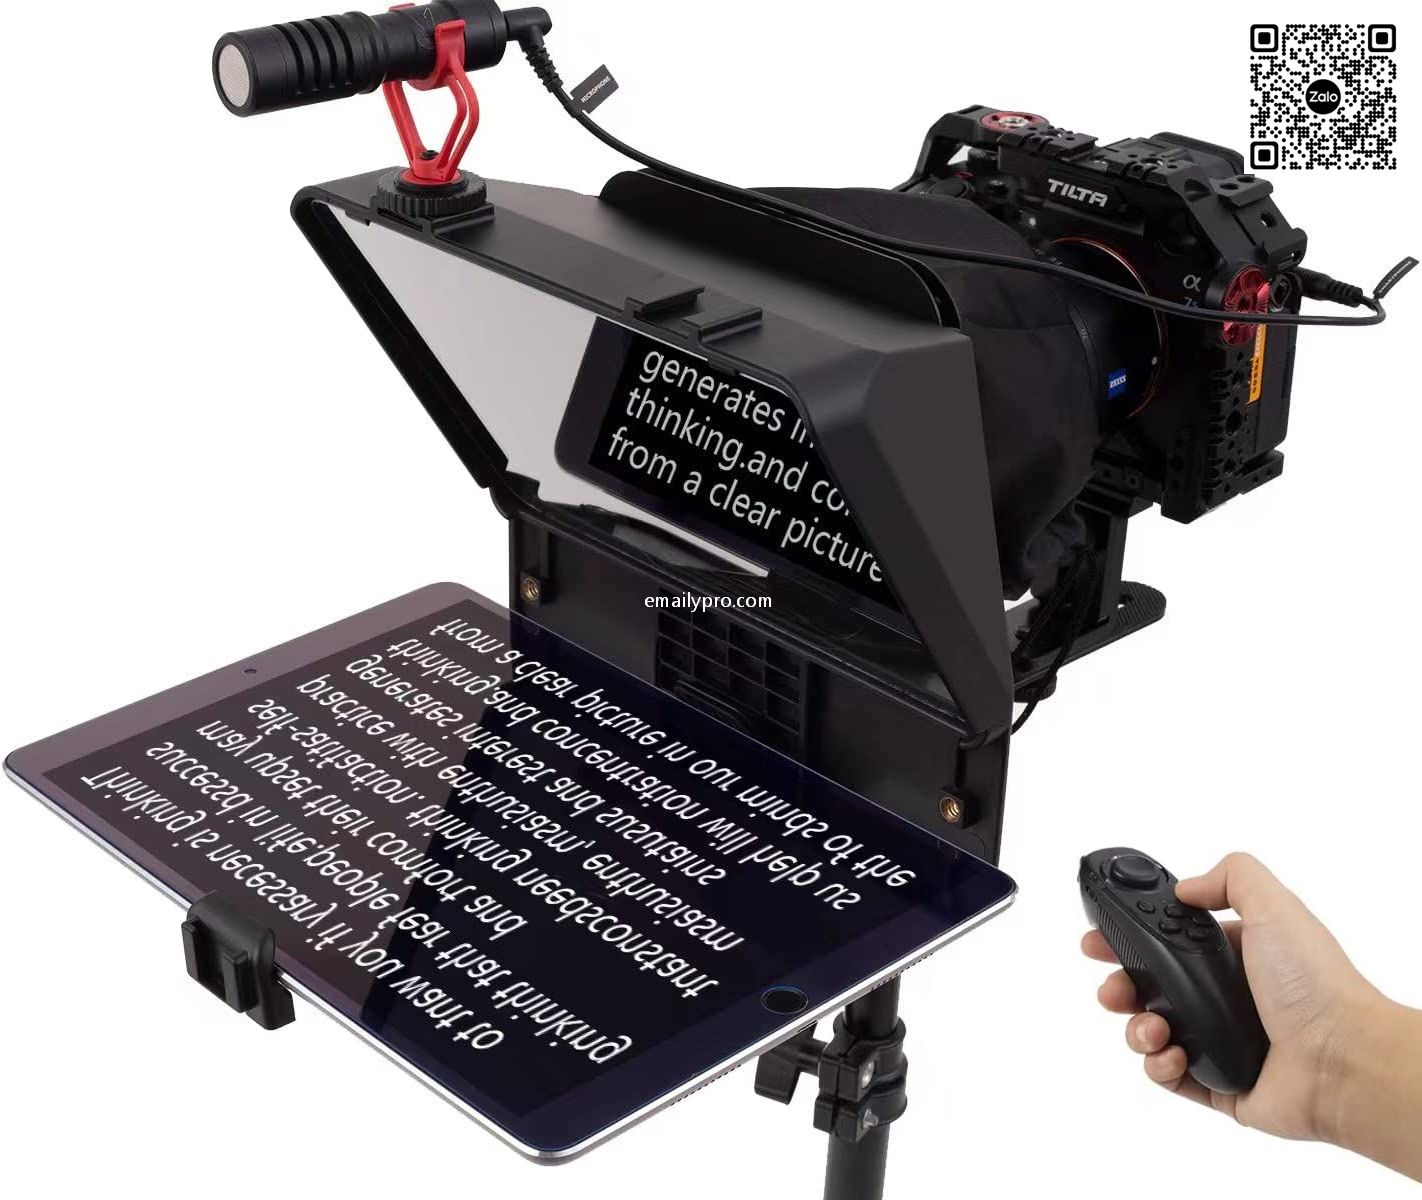 Teleprompter INMEI Professionnel 10 inch